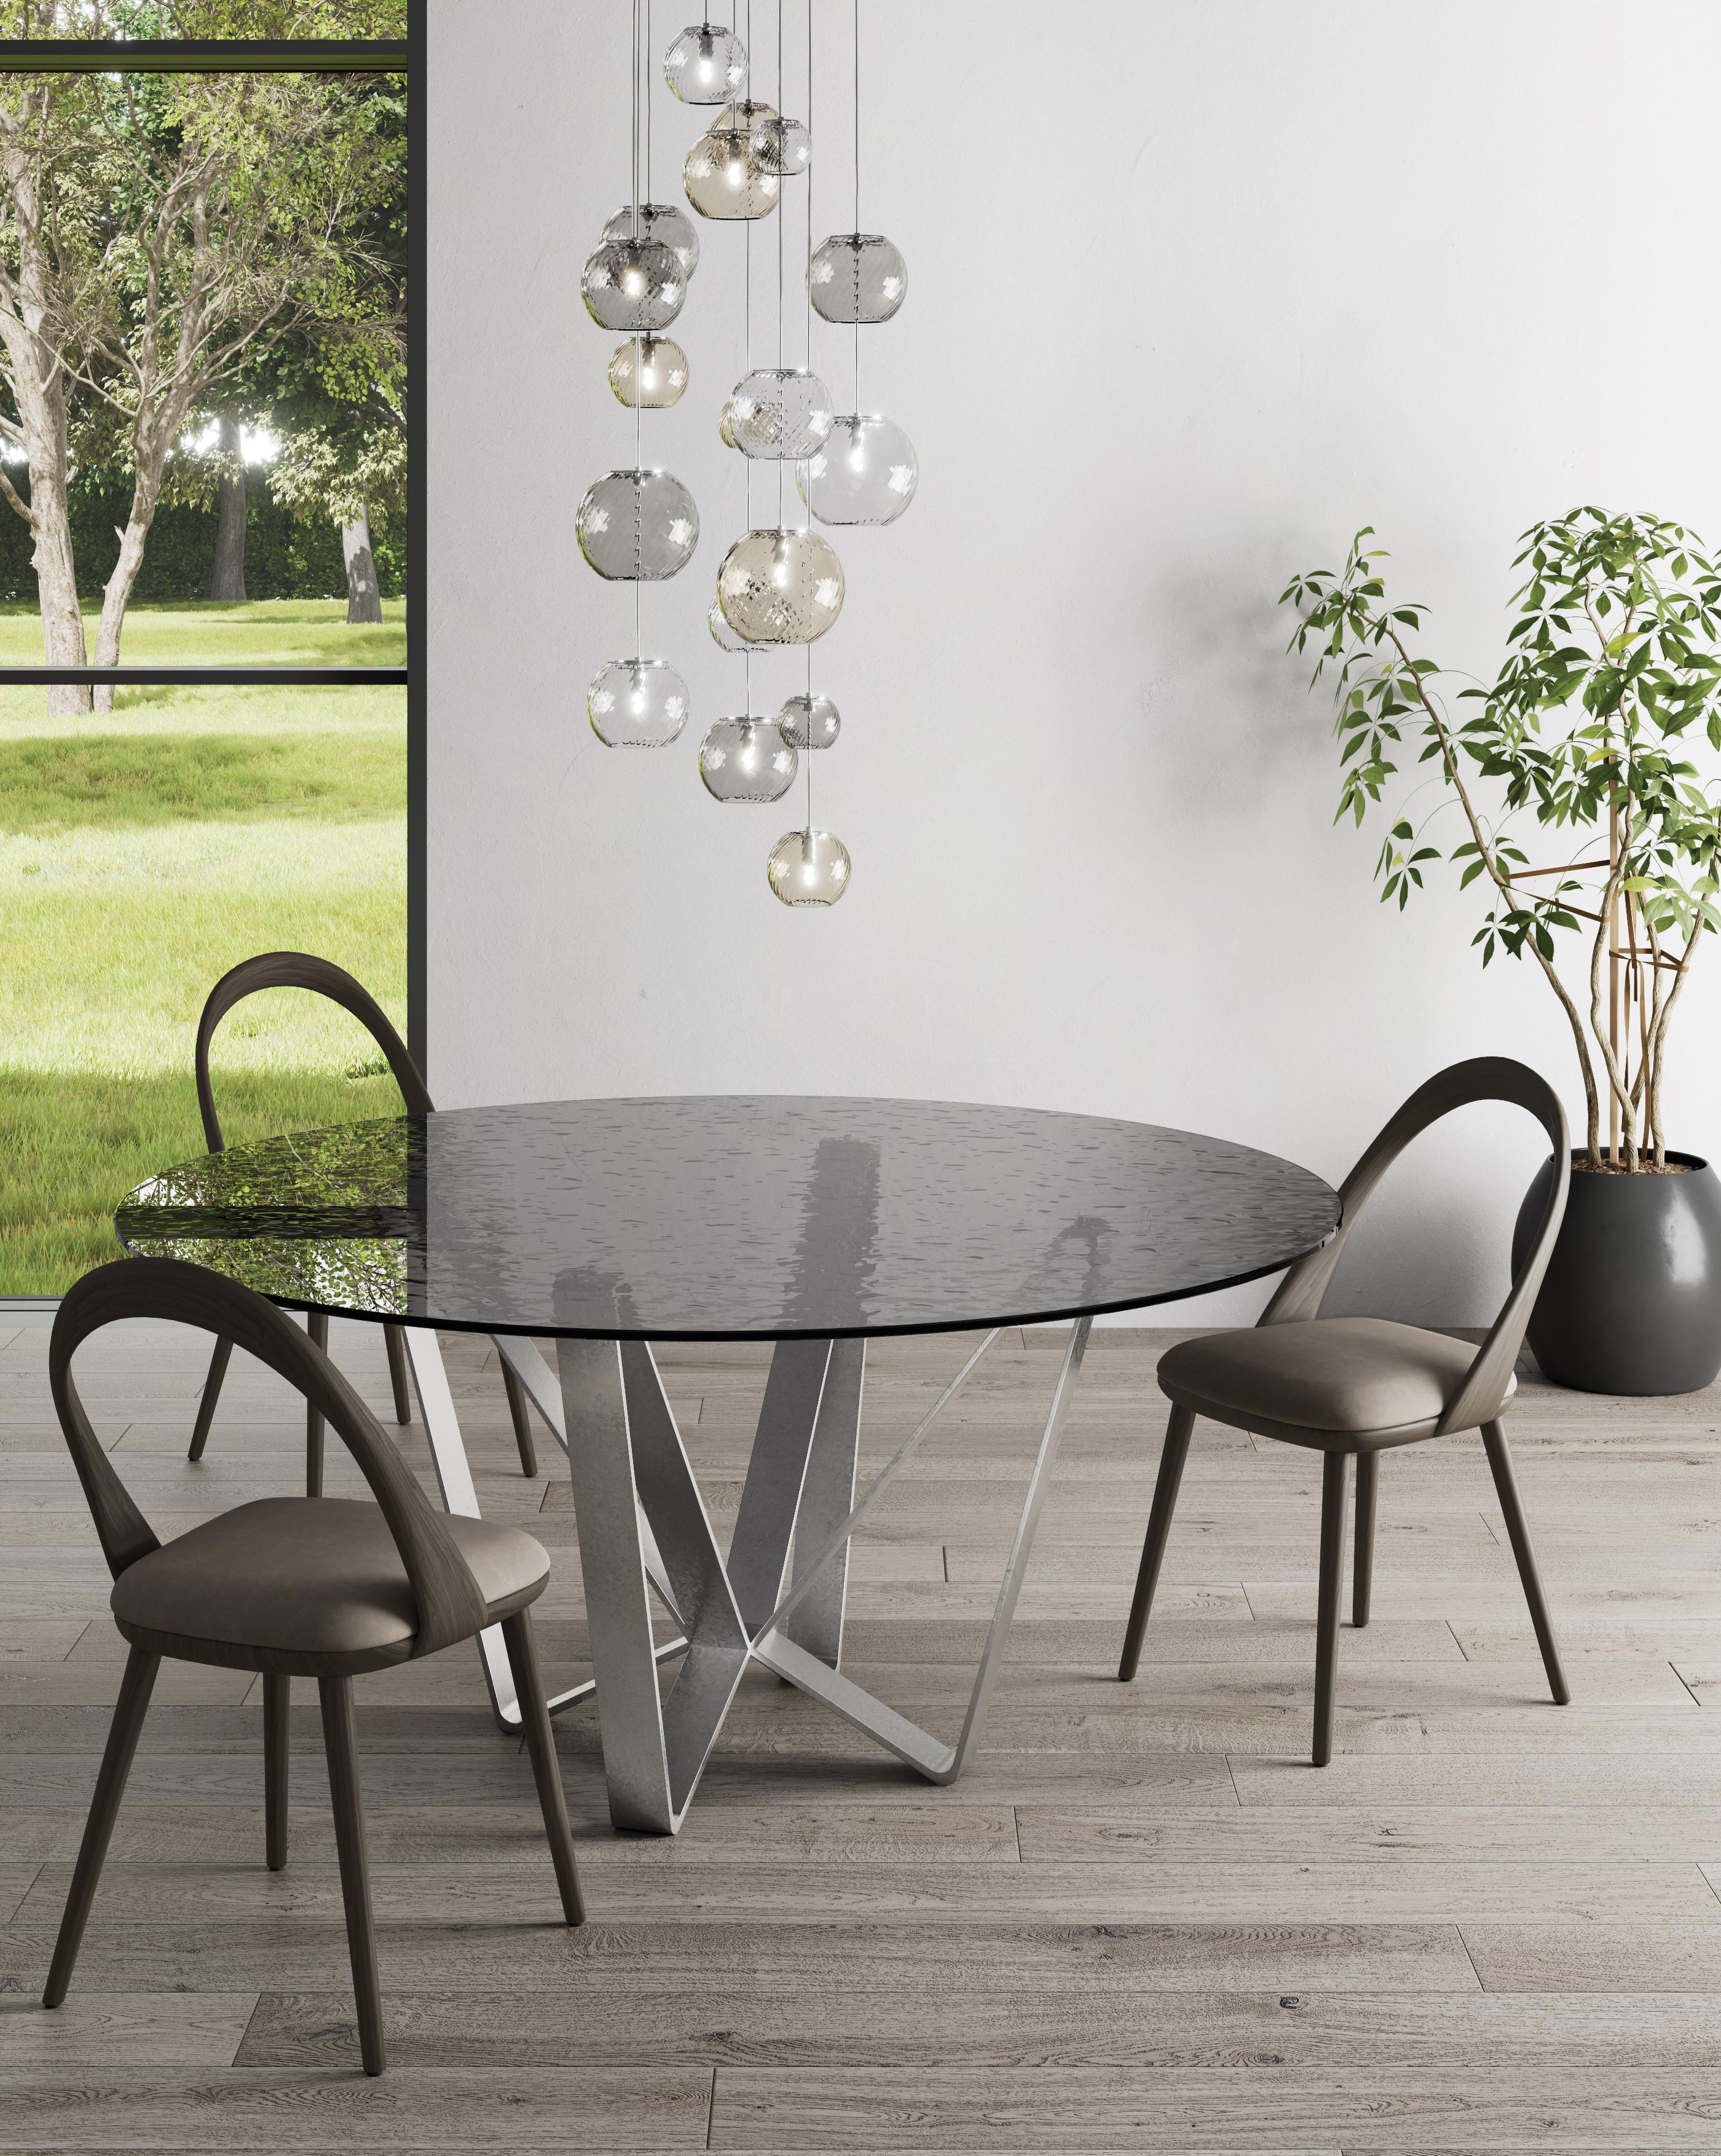 Zefiro Dining Table by Chinellato Design
Dimensions: D 1400 / 1600 x H 71.7 cm
Materials:
Top: Smoked hammered tempered glass.
Base: Chabin silver leaf-finished.


Round dining table available in two sizes, offered with three combinations of base